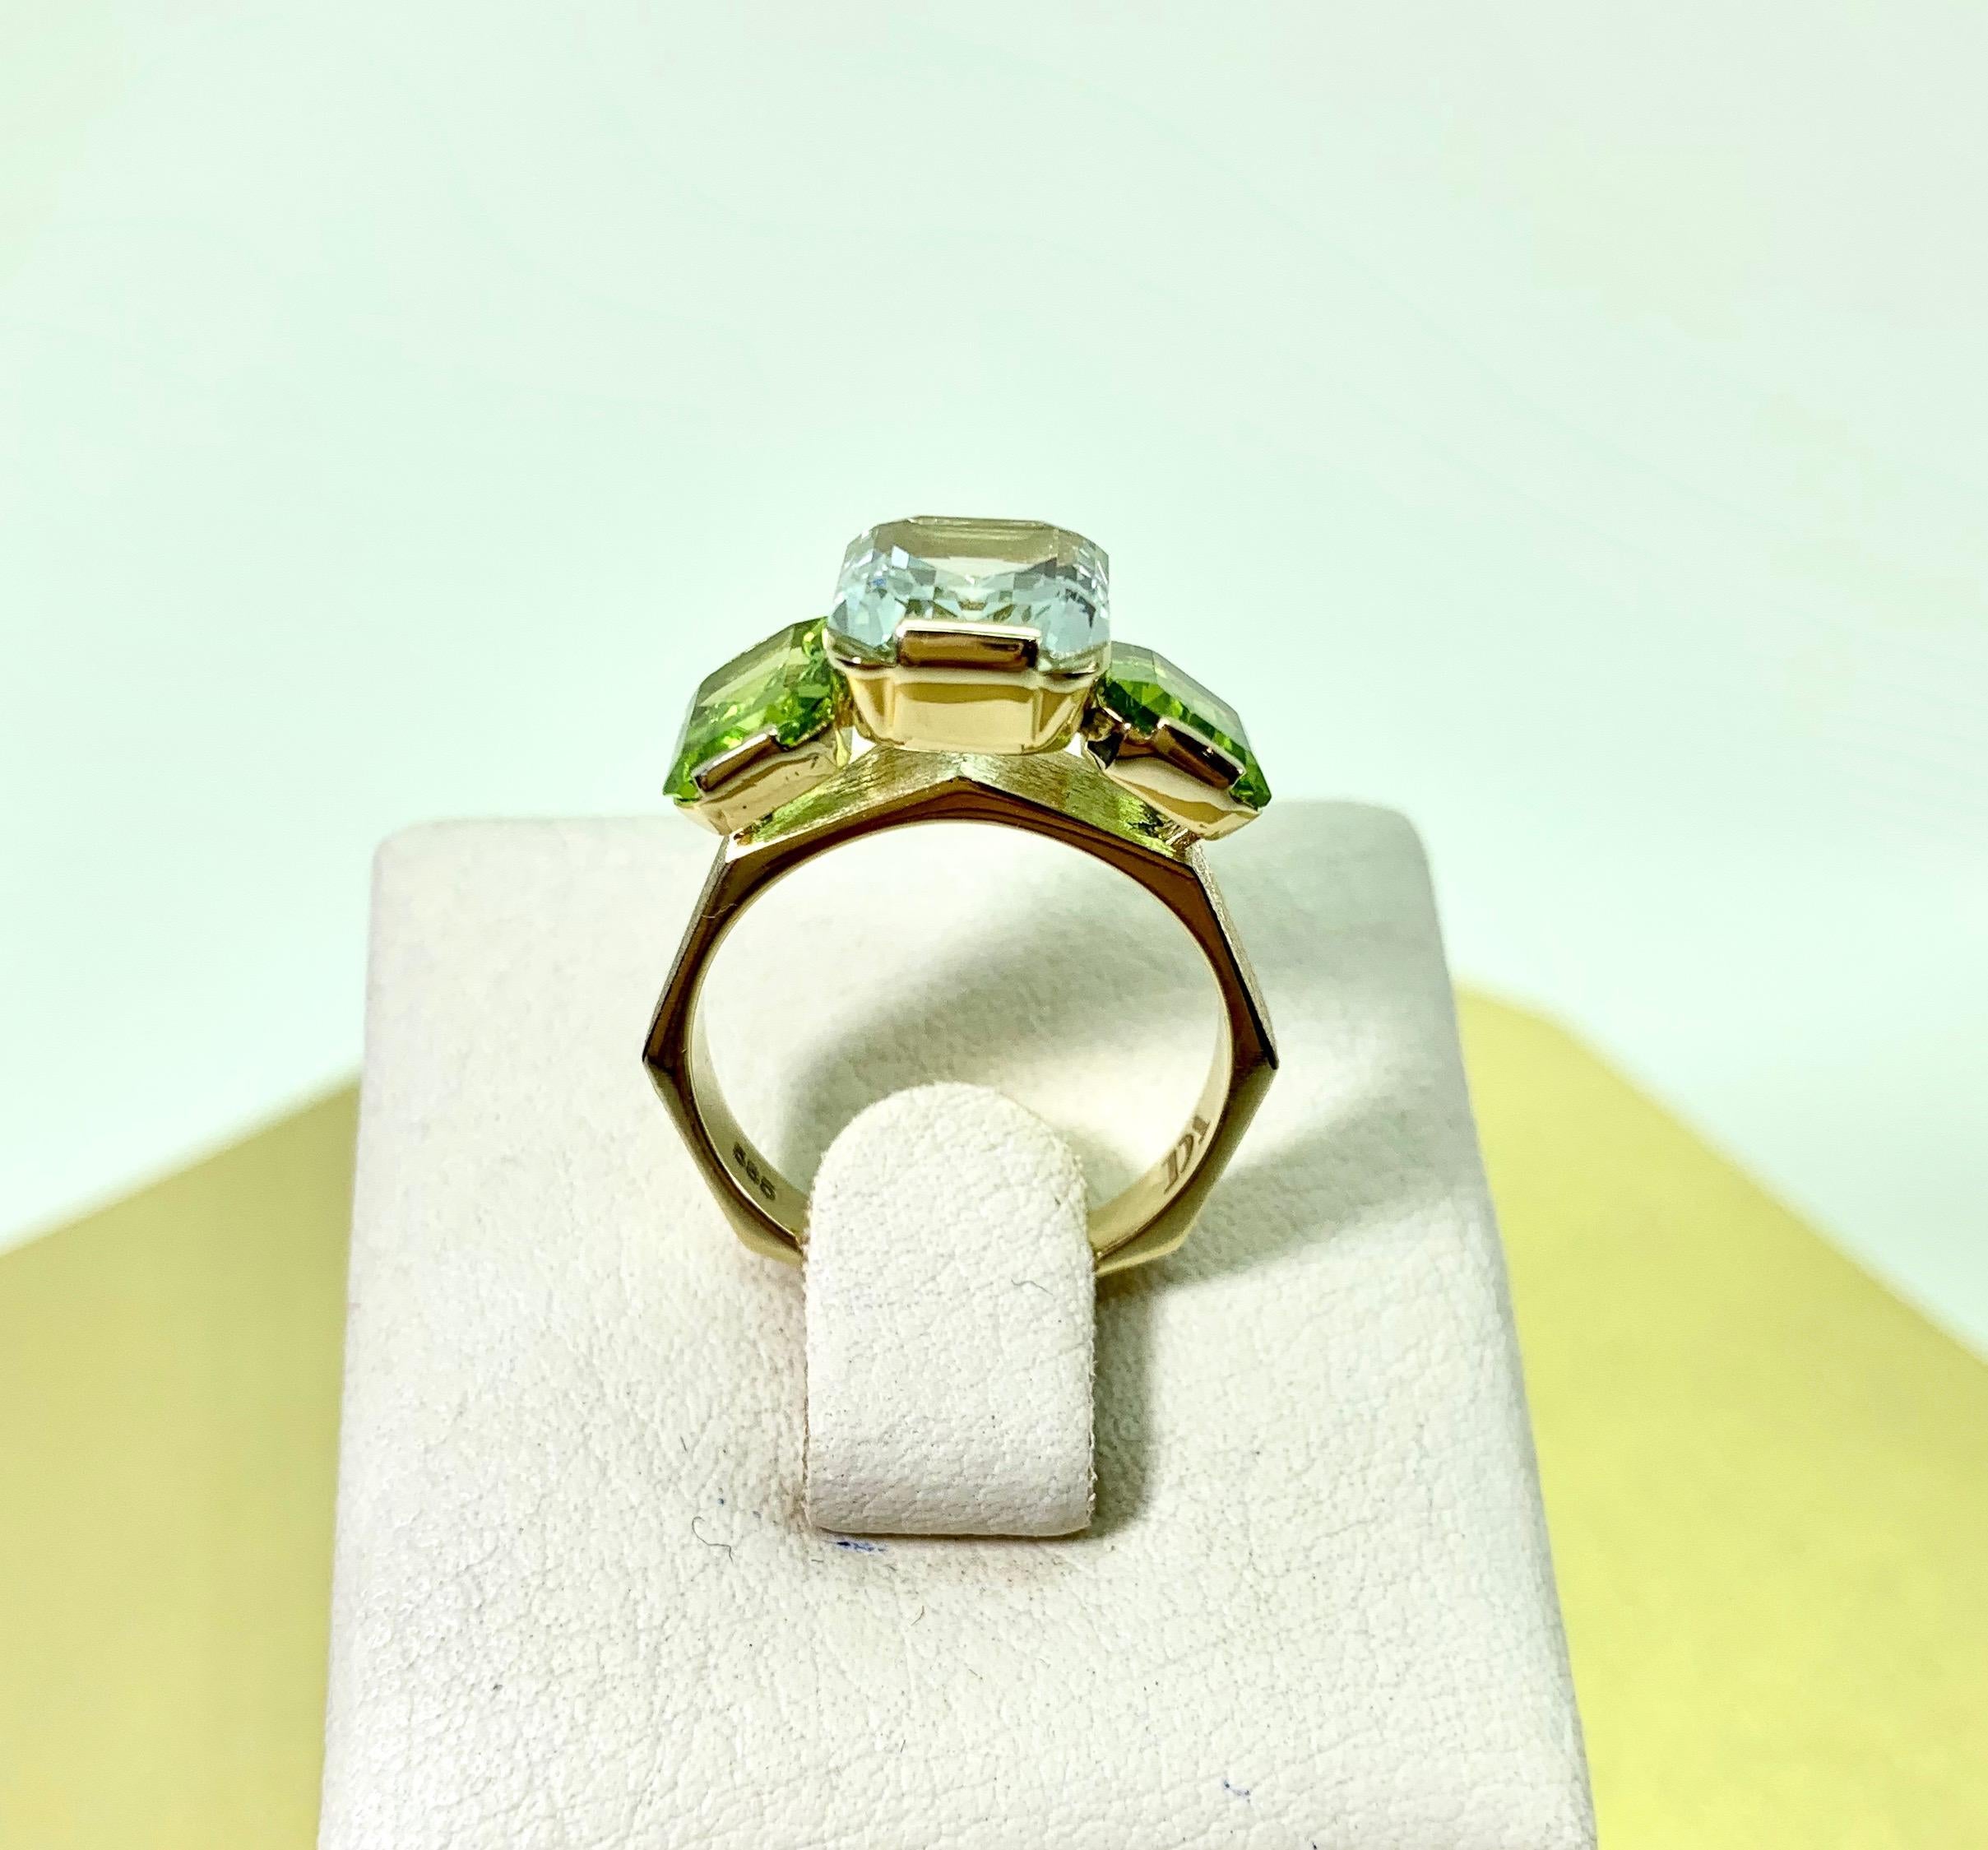 Here you can see very nice and very stylish combination of colors:
delicate green beryl and bright intense green peridots. 
The best idea for the ring with such stones - a geometrical airy ring from matte yellow gold. Such ring will look nice with